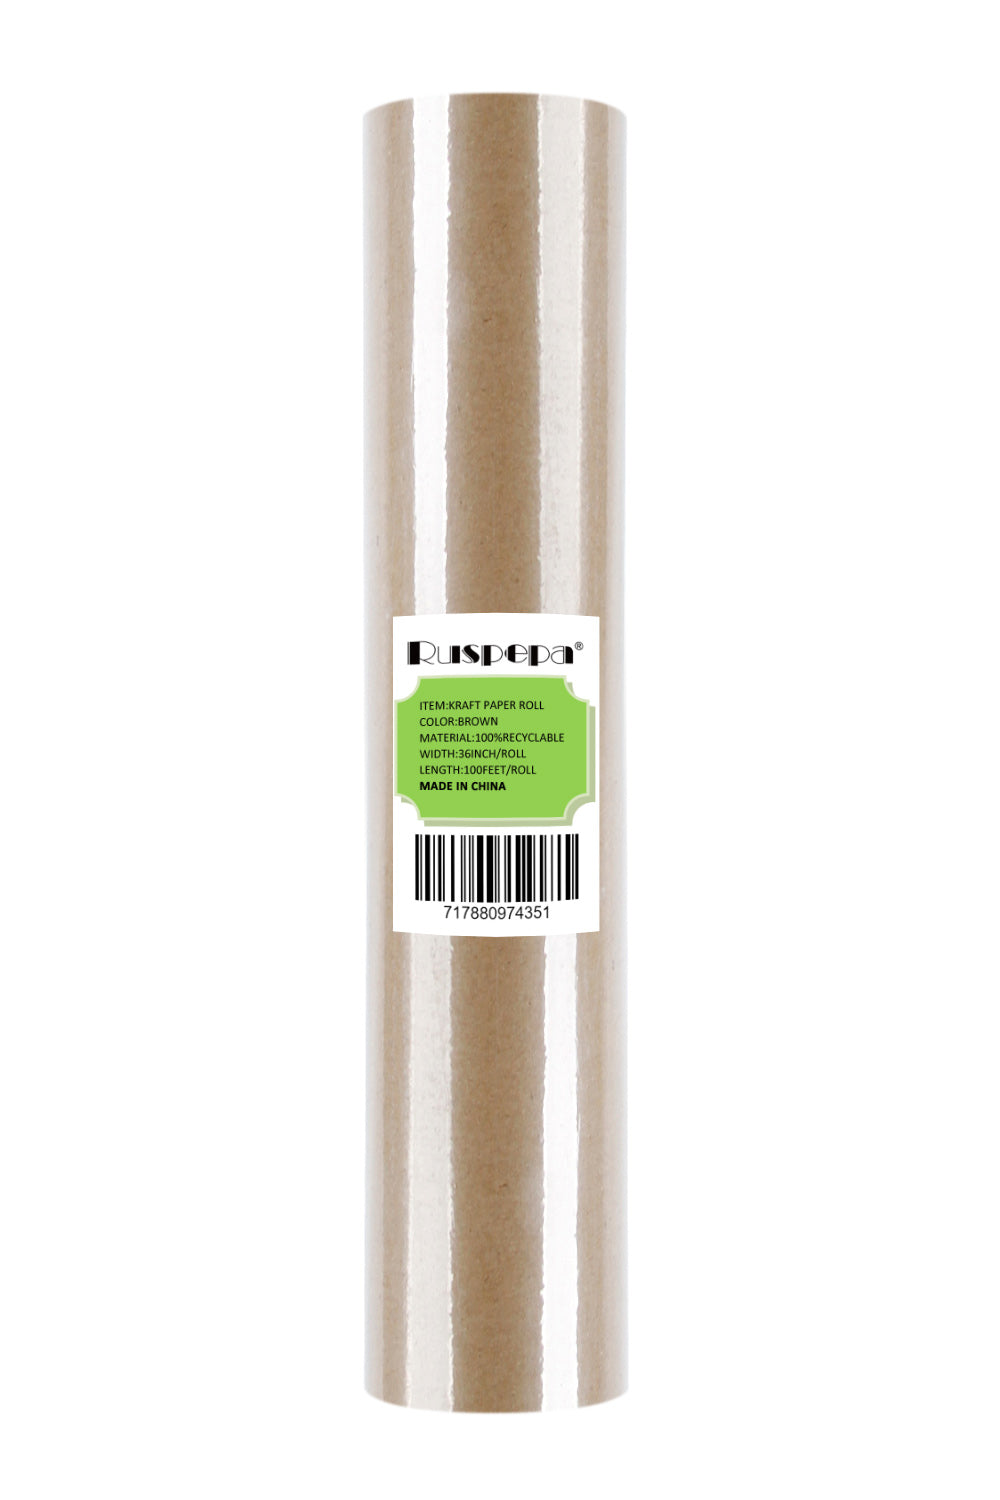  RUSPEPA Brown Kraft Paper Roll - 36 inches x 100 feet -  Recyclable Paper Perfect for Wrapping, Craft, Packing, Floor Covering,  Dunnage, Parcel, Table Runner : Health & Household